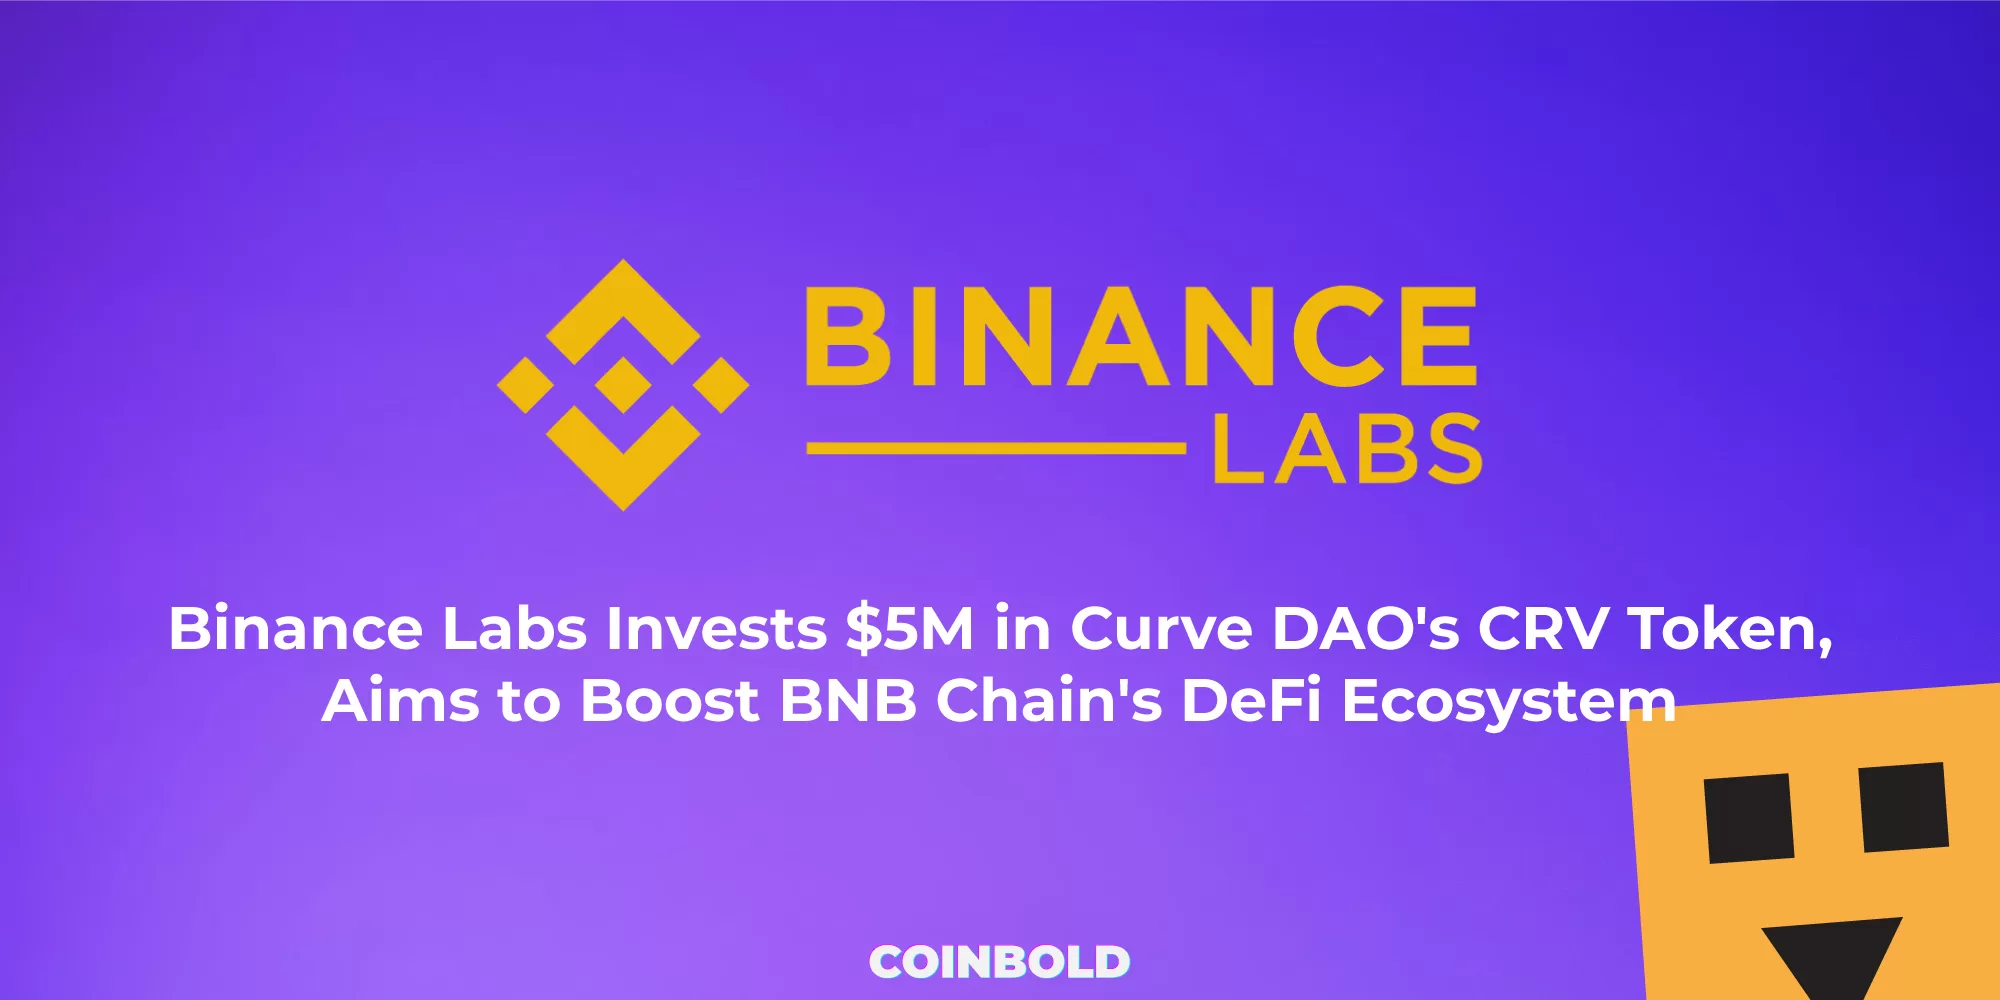 Binance Labs Invests $5M in Curve DAO's CRV Token, Aims to Boost BNB Chain's DeFi Ecosystem